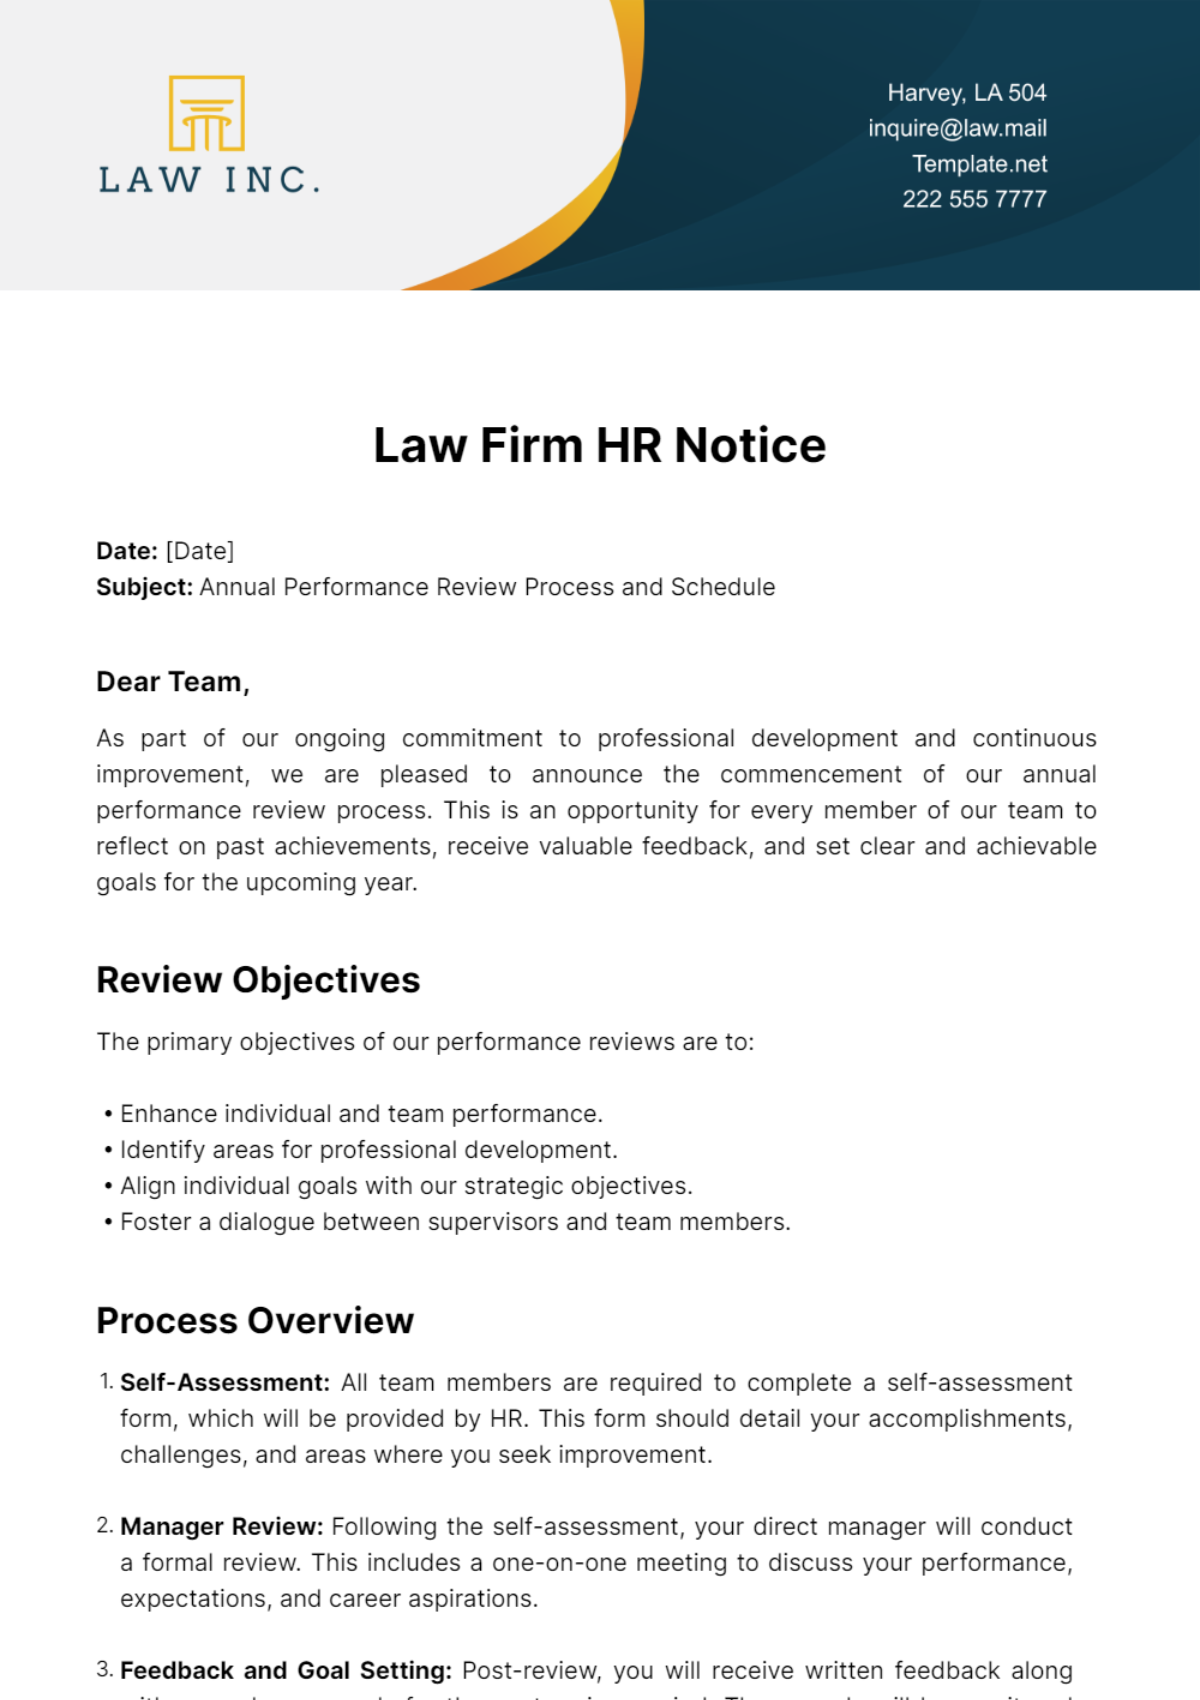 Free Law Firm HR Notice Template